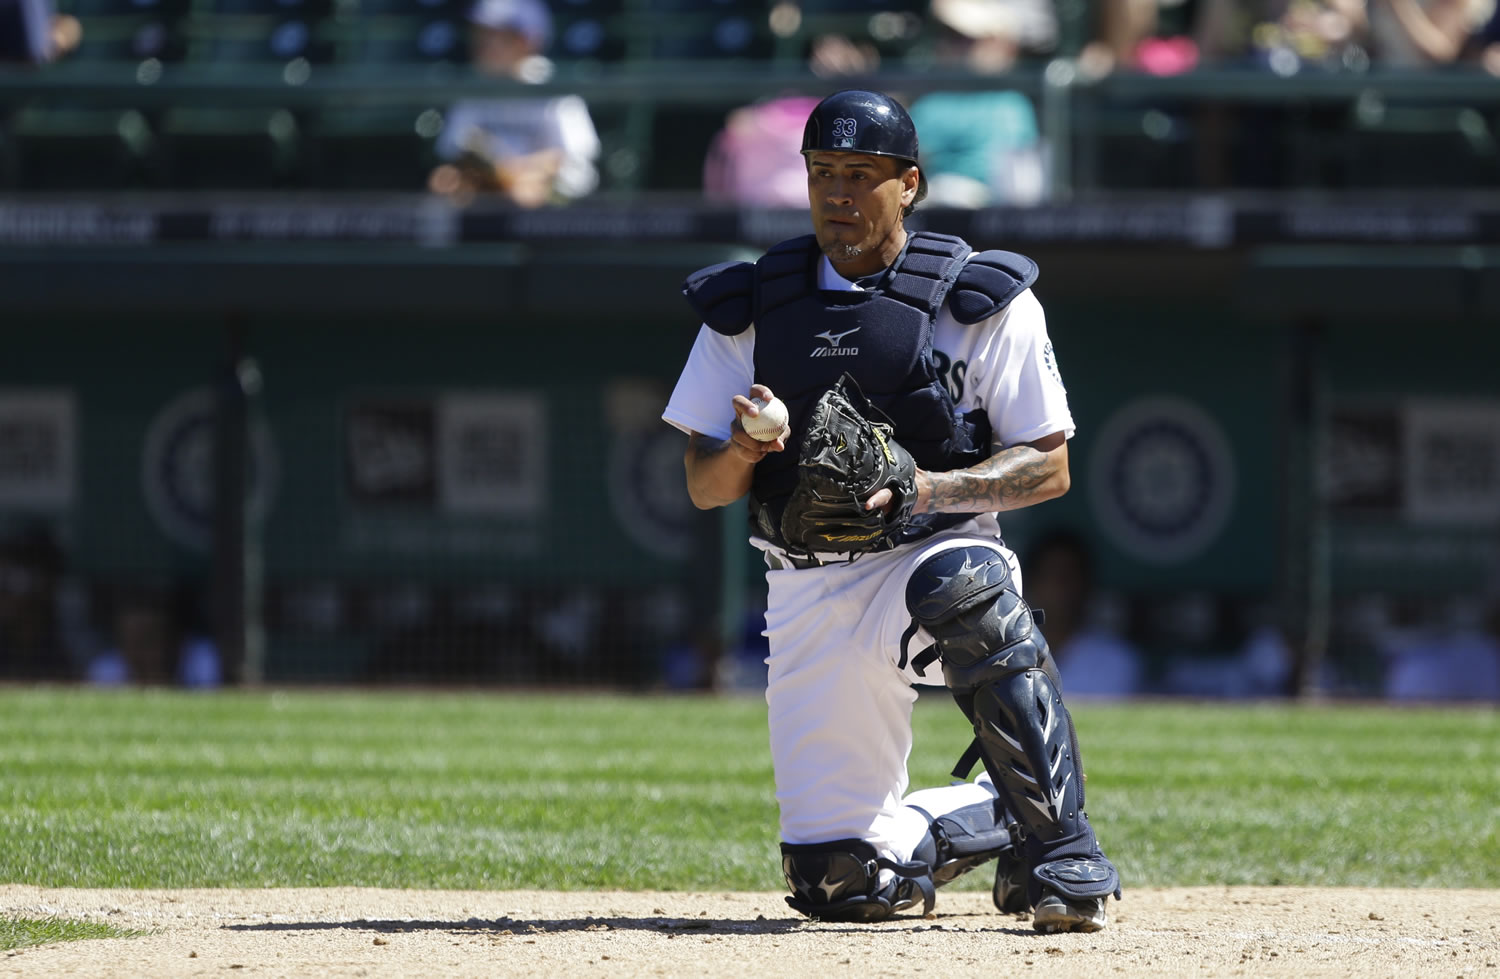 Seattle Mariners catcher Henry Blanco holds the ball in the ninth inning of a baseball game against the Cleveland Indians, Wednesday, July 24, 2013, in Seattle. The Indians beat the Mariners, 10-1. (AP Photo/Ted S.